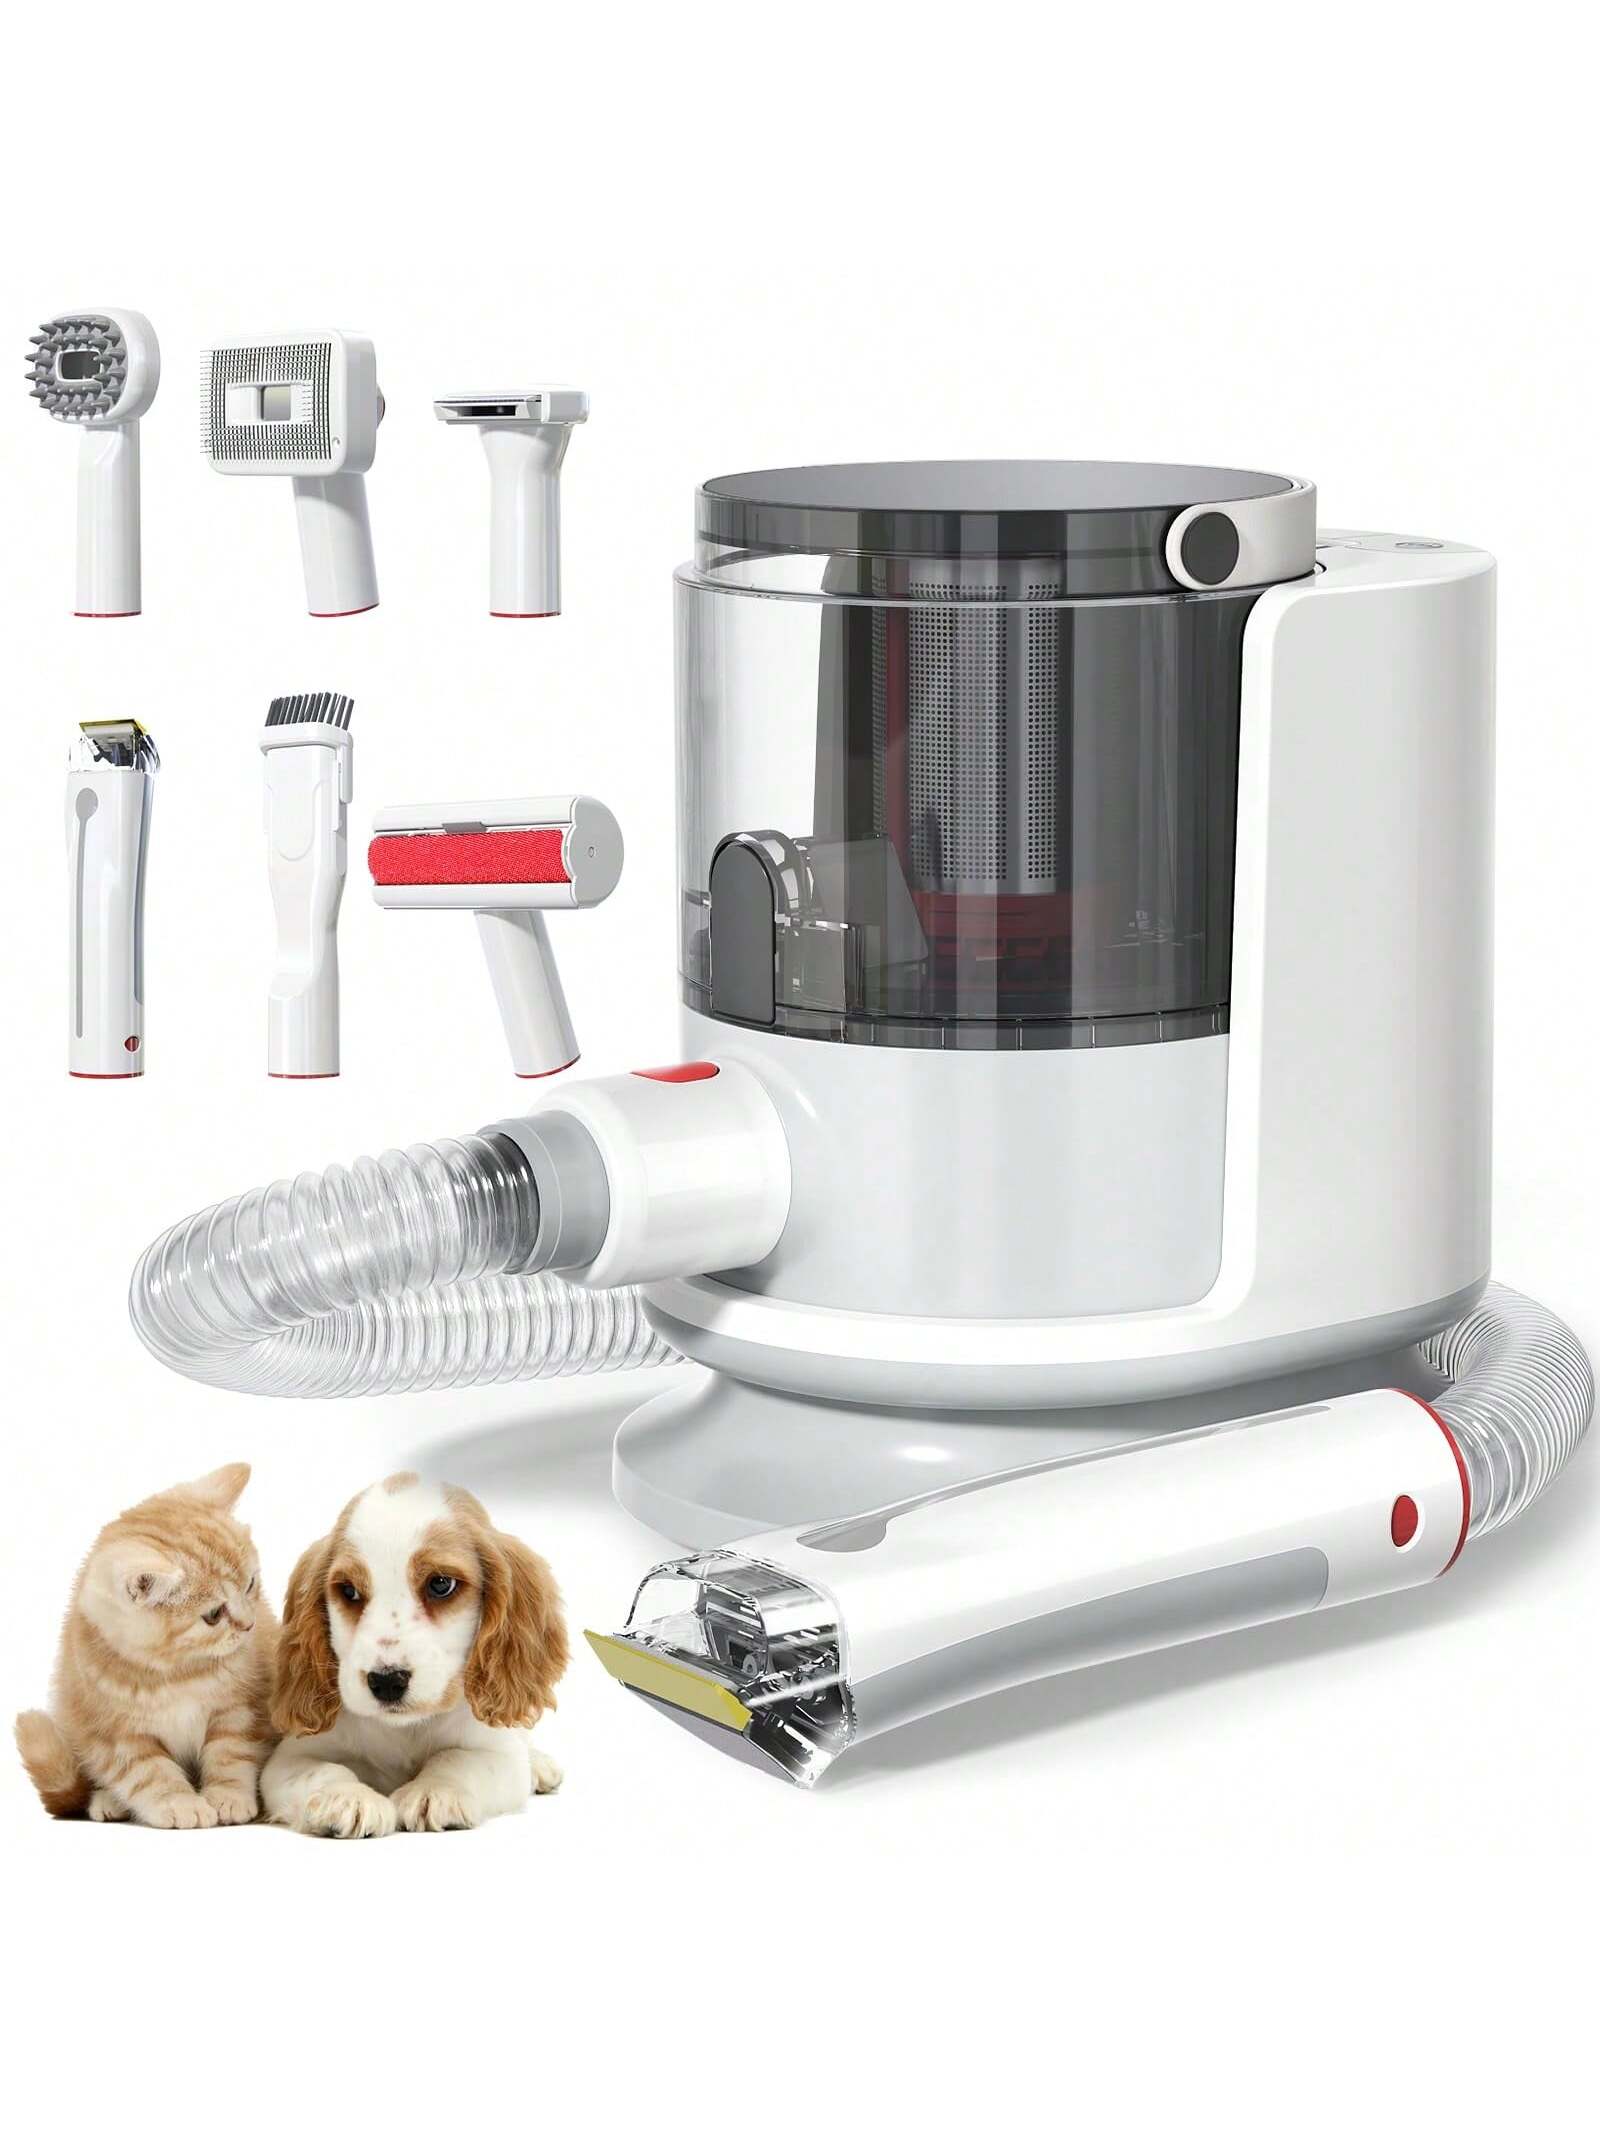 Professional Dog Grooming Kit with Vacuum Suction, Pet Hair Remover, Clipper, Brush, and Shedding Tools - Low Noise Pet Grooming Supplies```